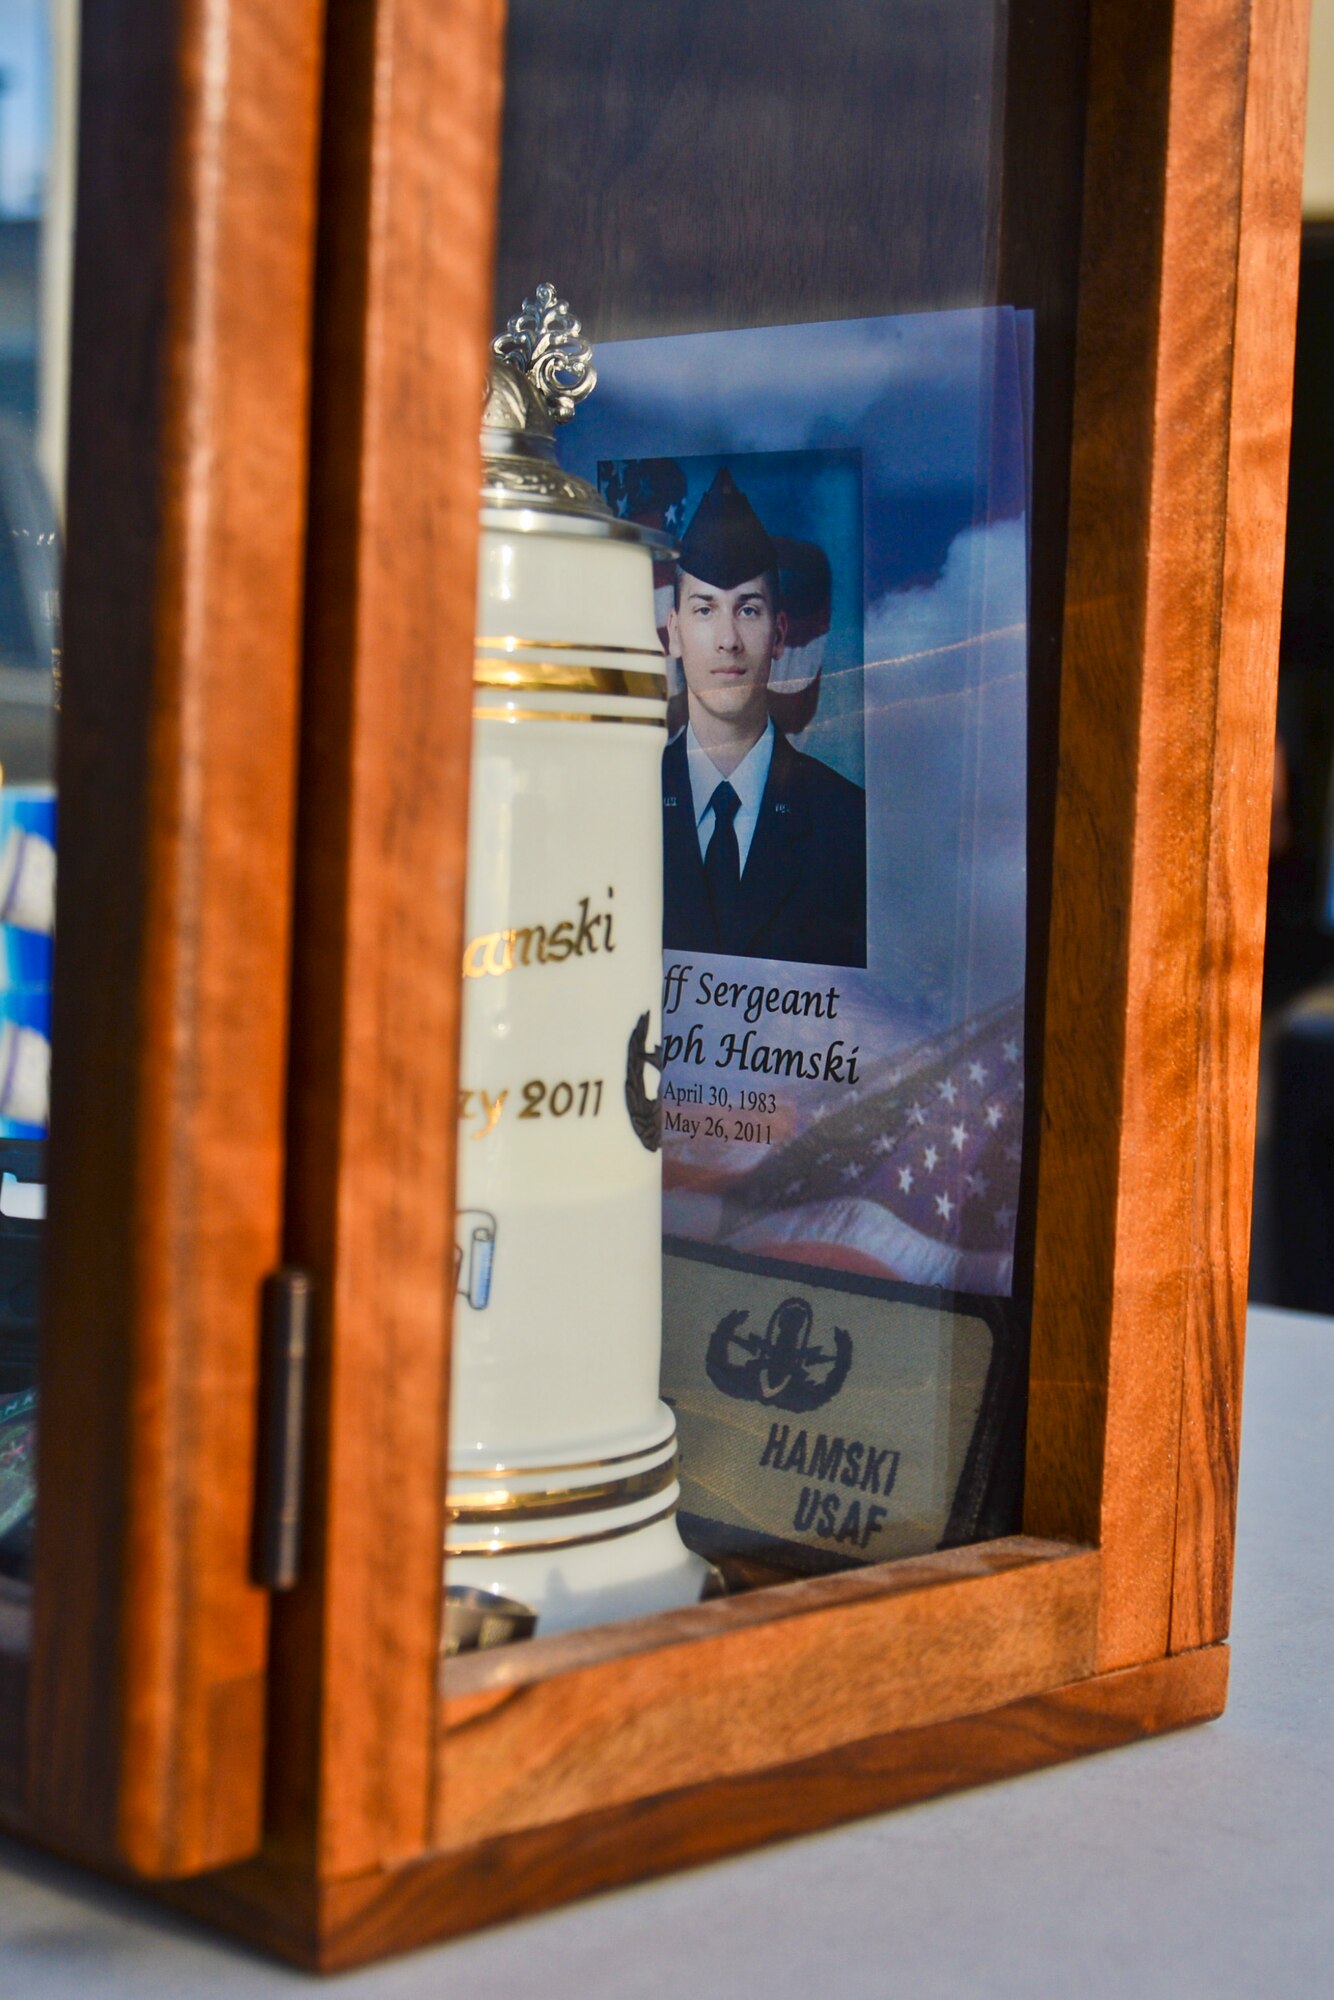 A memorial case for U.S. Air Force Staff Sgt. Joseph Hamski, formerly assigned to the 52nd Civil Engineer Squadron explosive ordnance disposal flight, rests on a table before the Jog for Joe Memorial 5K at the base track at Spangdahlem Air Base, Germany, June 20, 2014. The 52nd CES EOD flight organized the run to honor legacy of Hamski, who was killed in support of Operation Enduring Freedom May 26, 2011. (U.S. Air Force photo by Staff Sgt. Joe W. McFadden/Released)